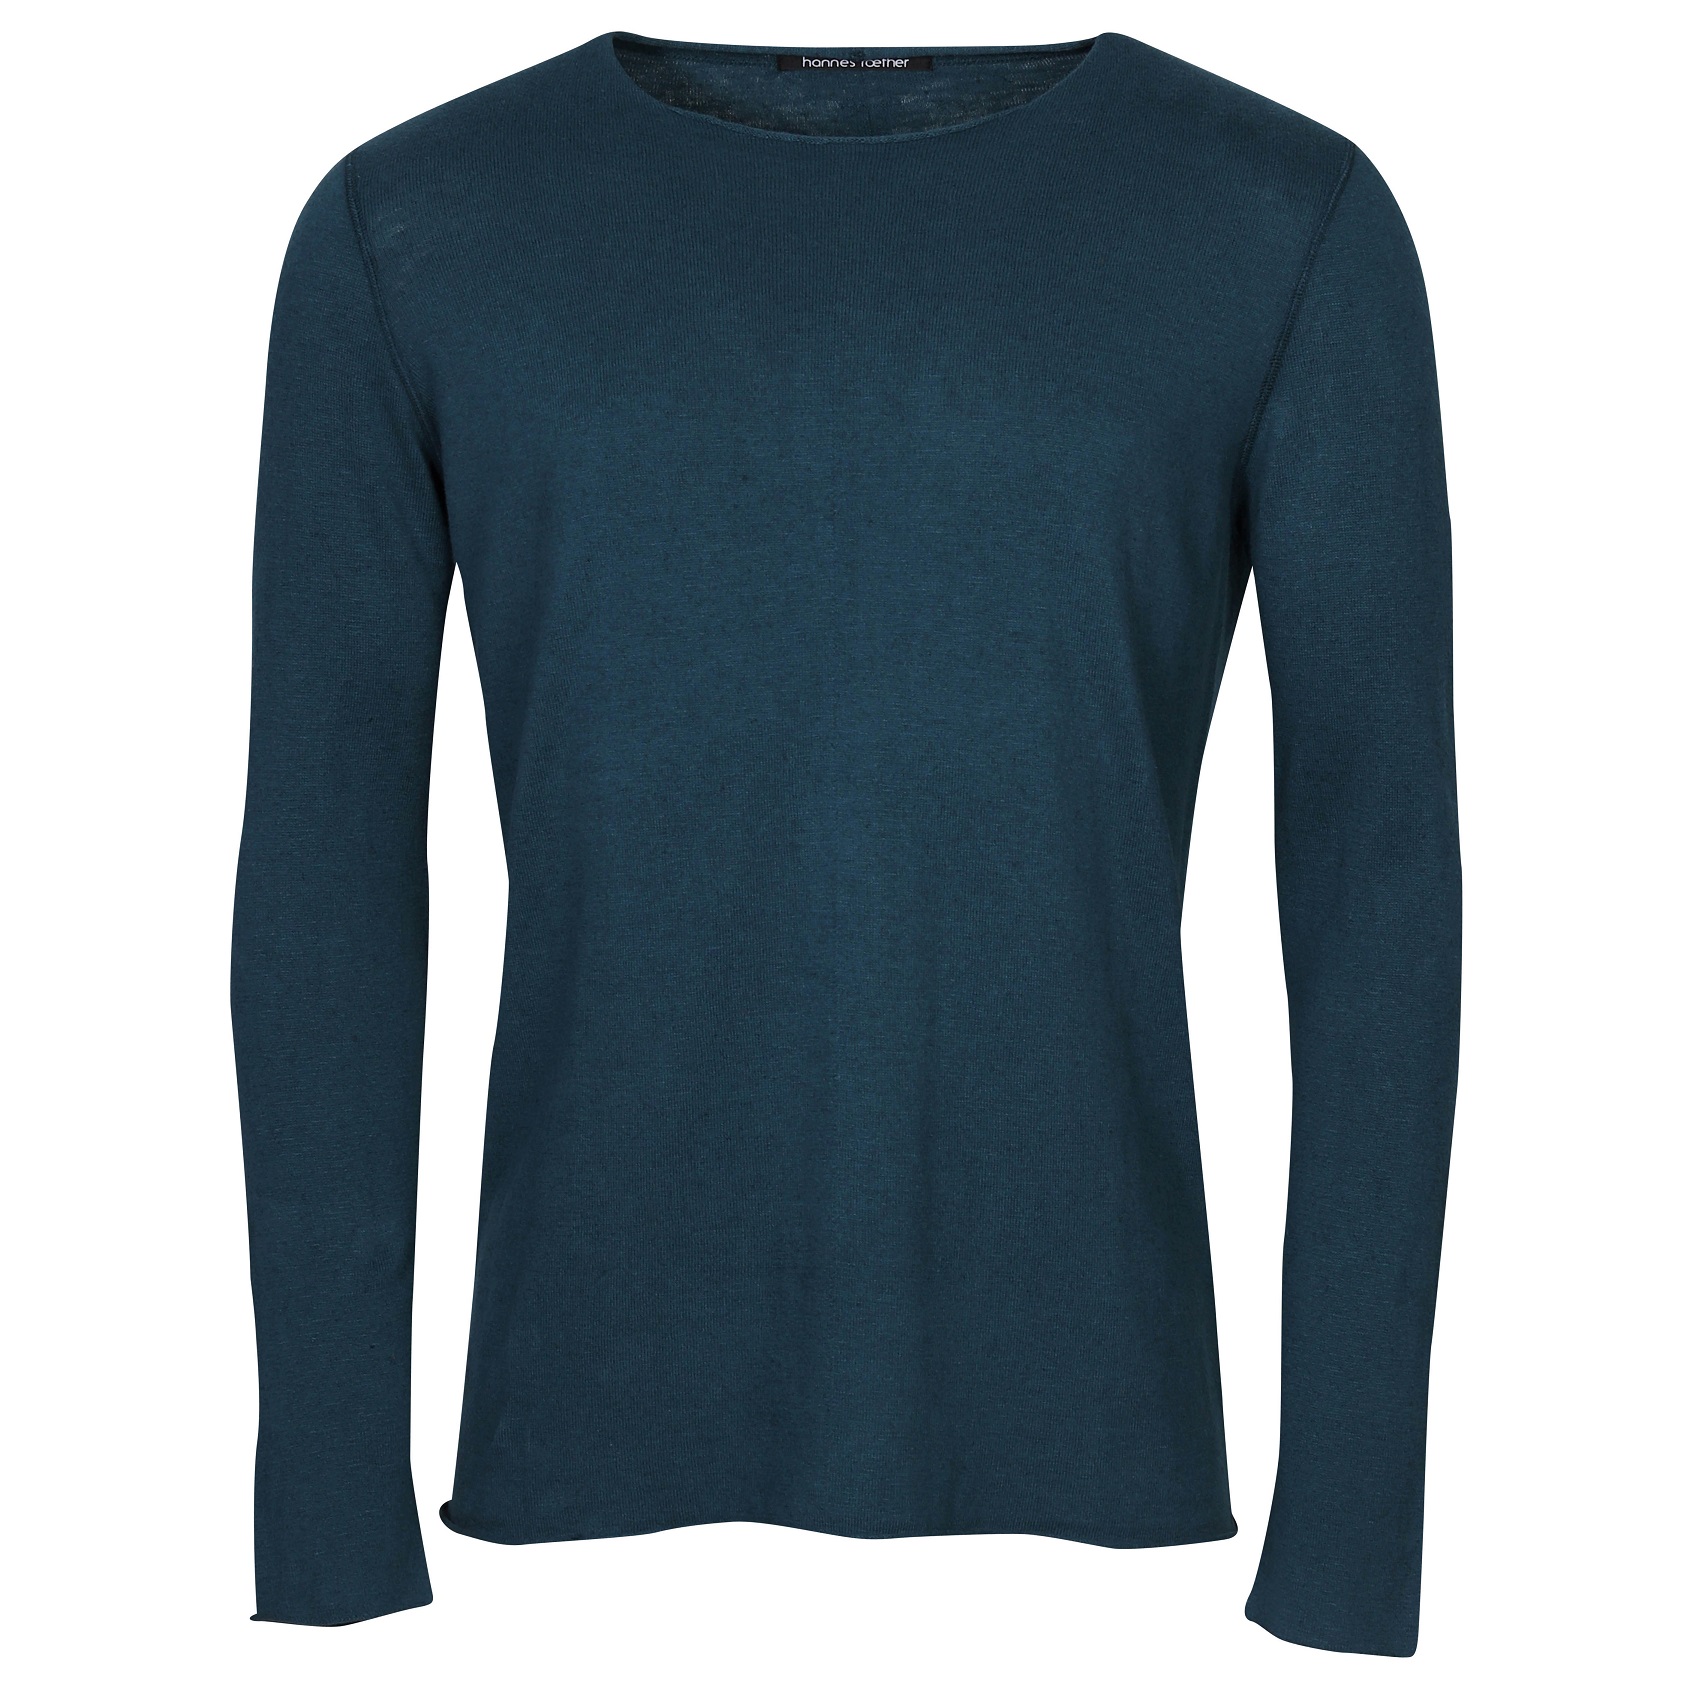 HANNES ROETHER Knit Sweater in Petrol